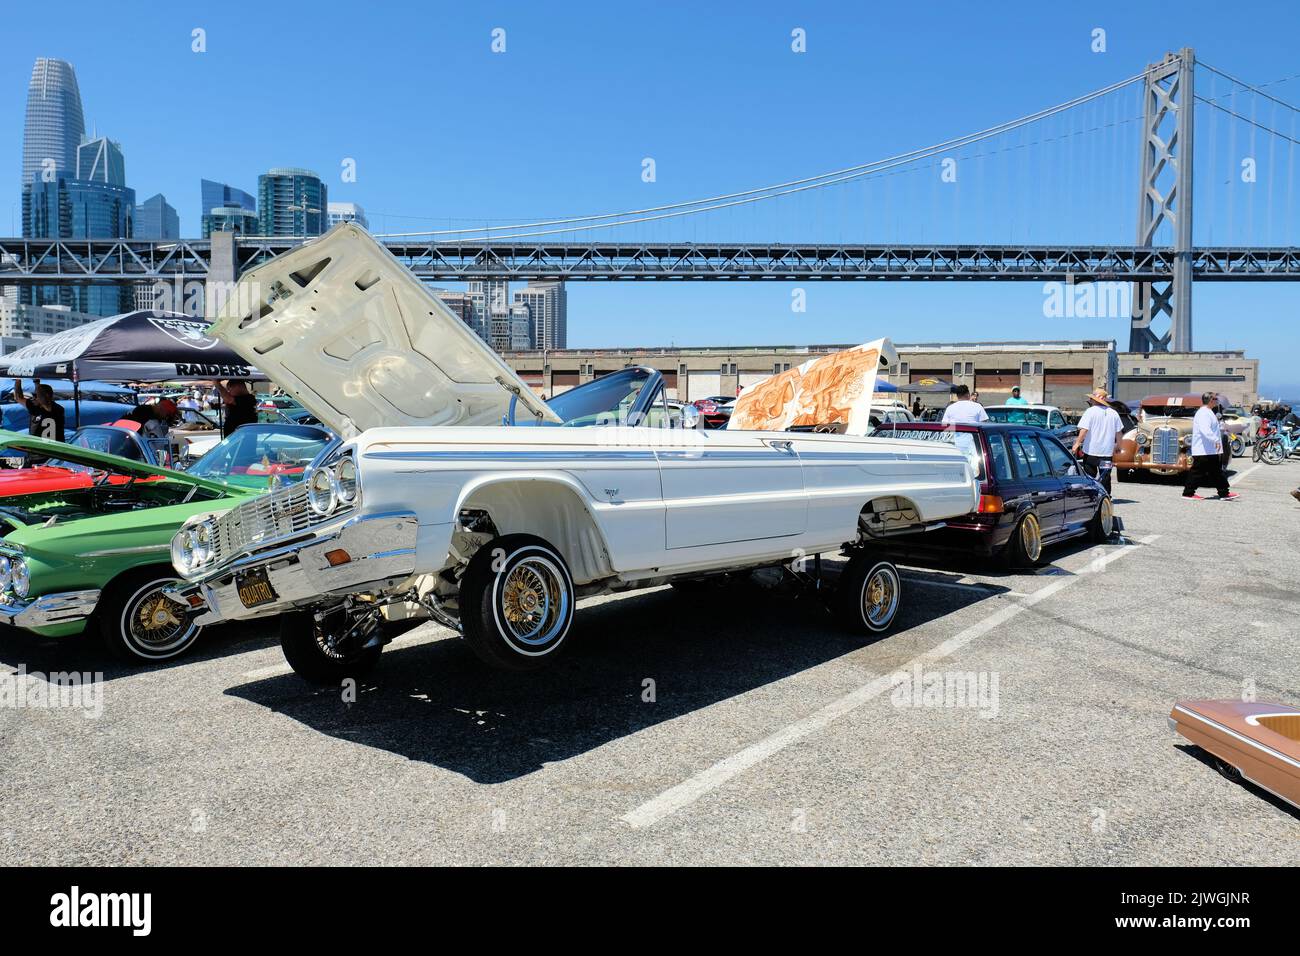 A white 1964 Chevy Impala lowrider car with raised hood and hydraulic system engaged with the Bay Bridge in the background; San Francisco, California. Stock Photo